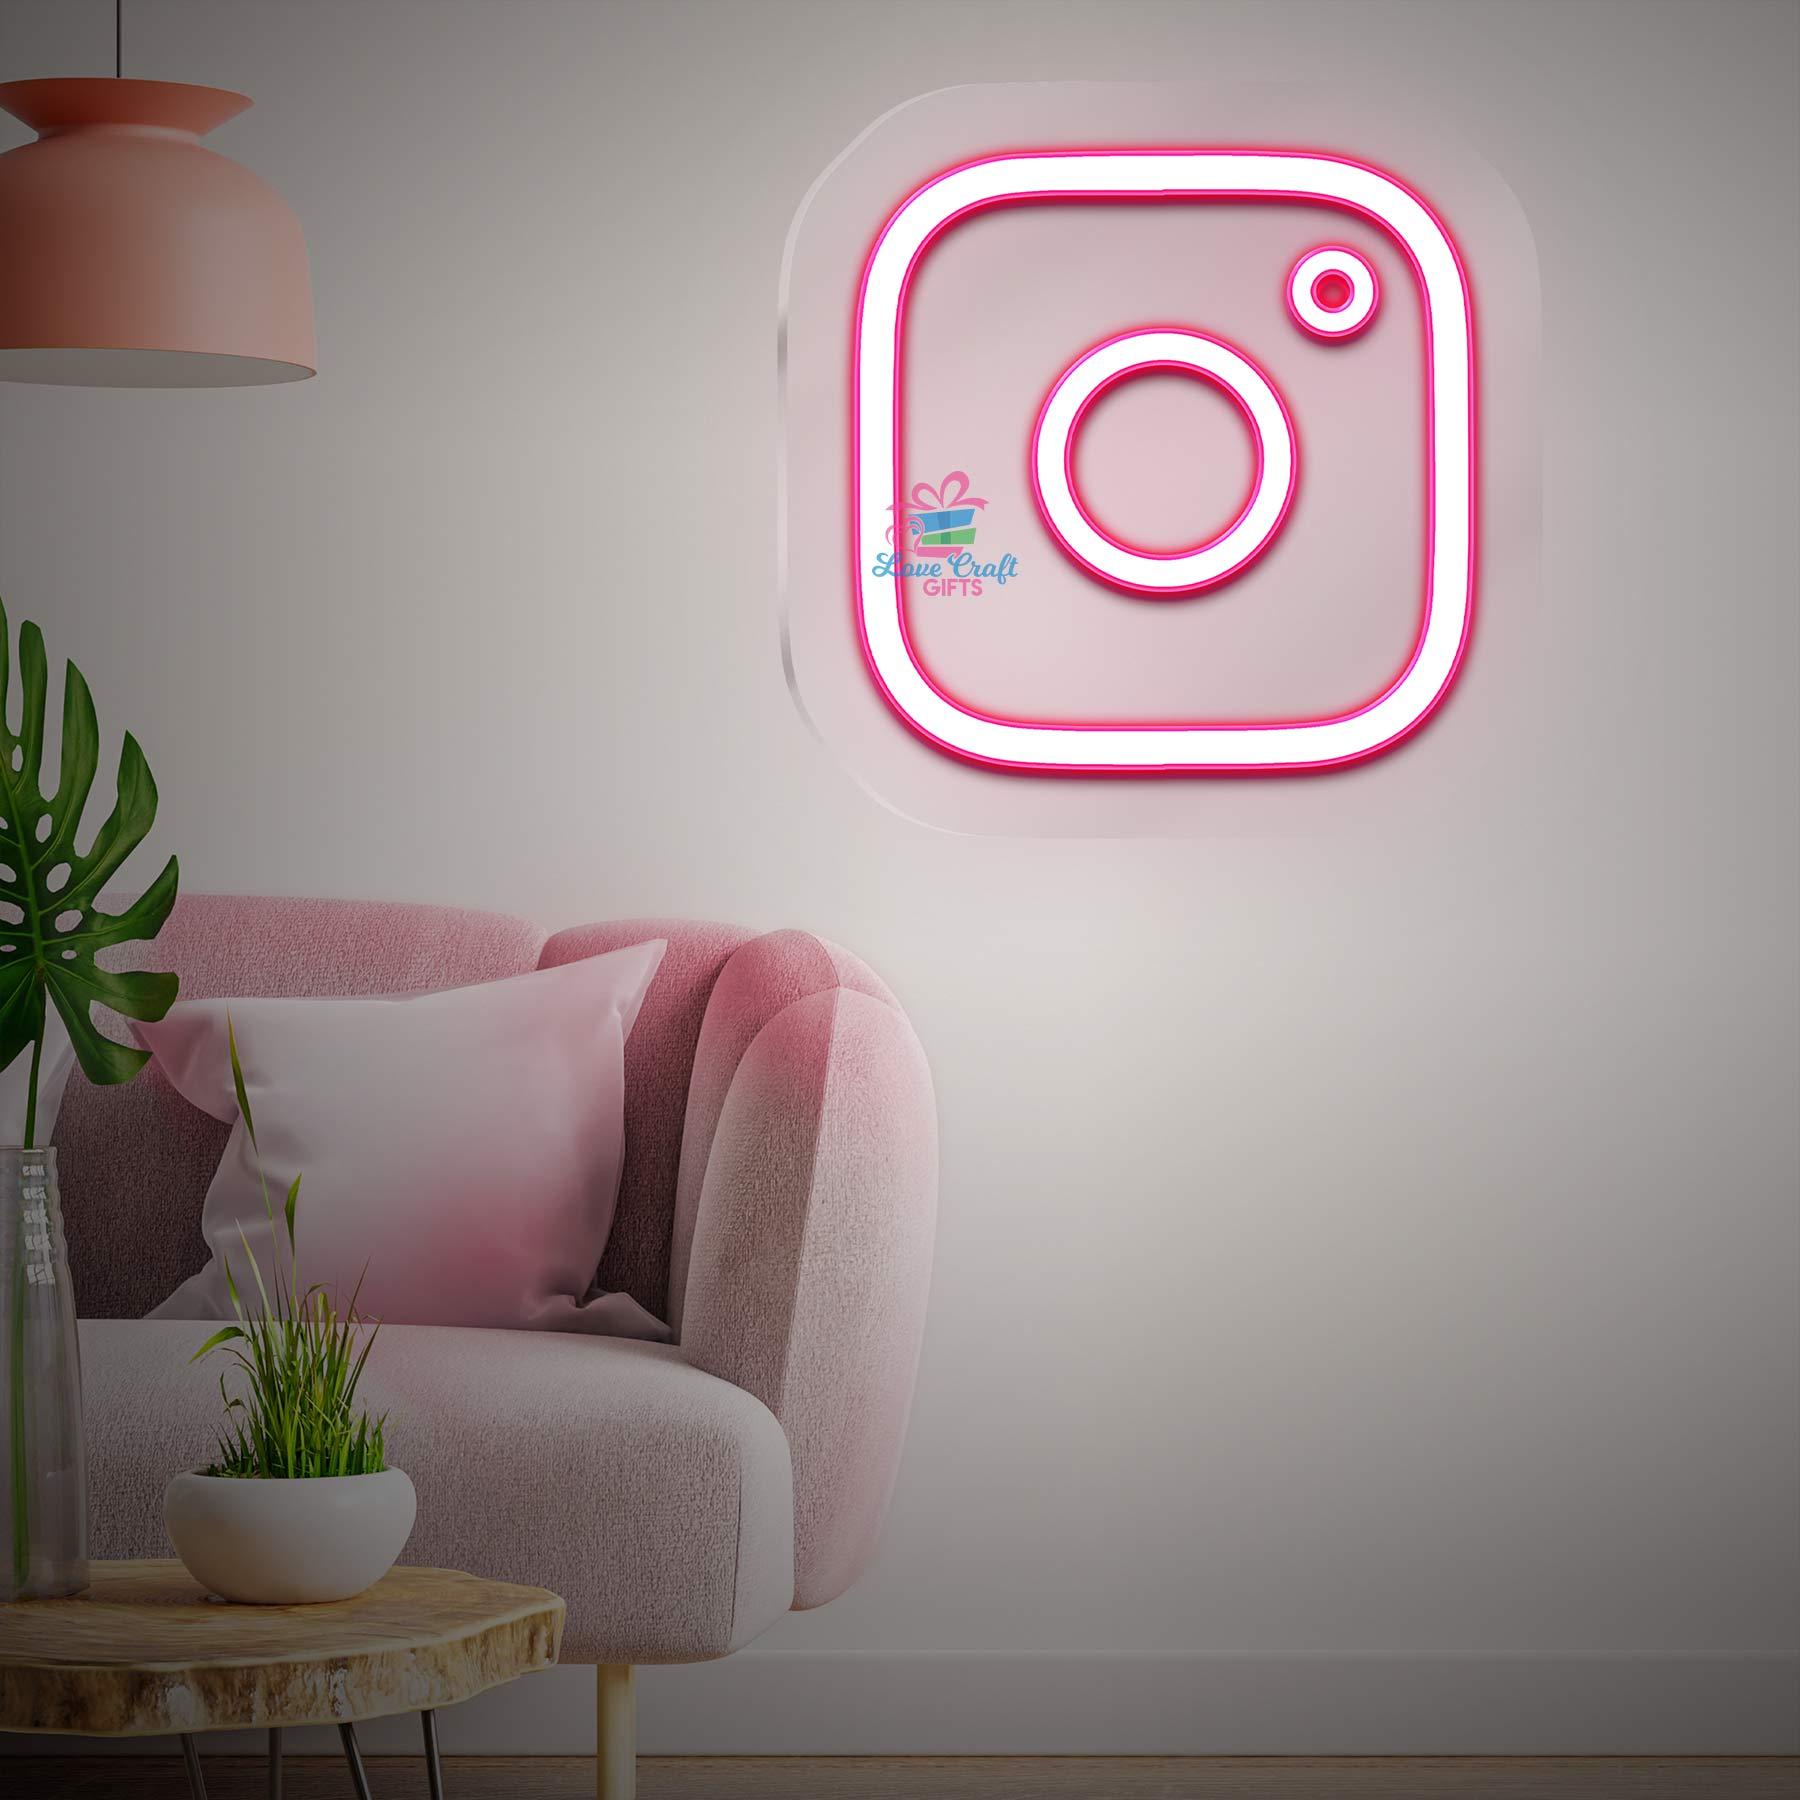 Instagram hd cb backgrounds free Total PNG | Free Stock Photos